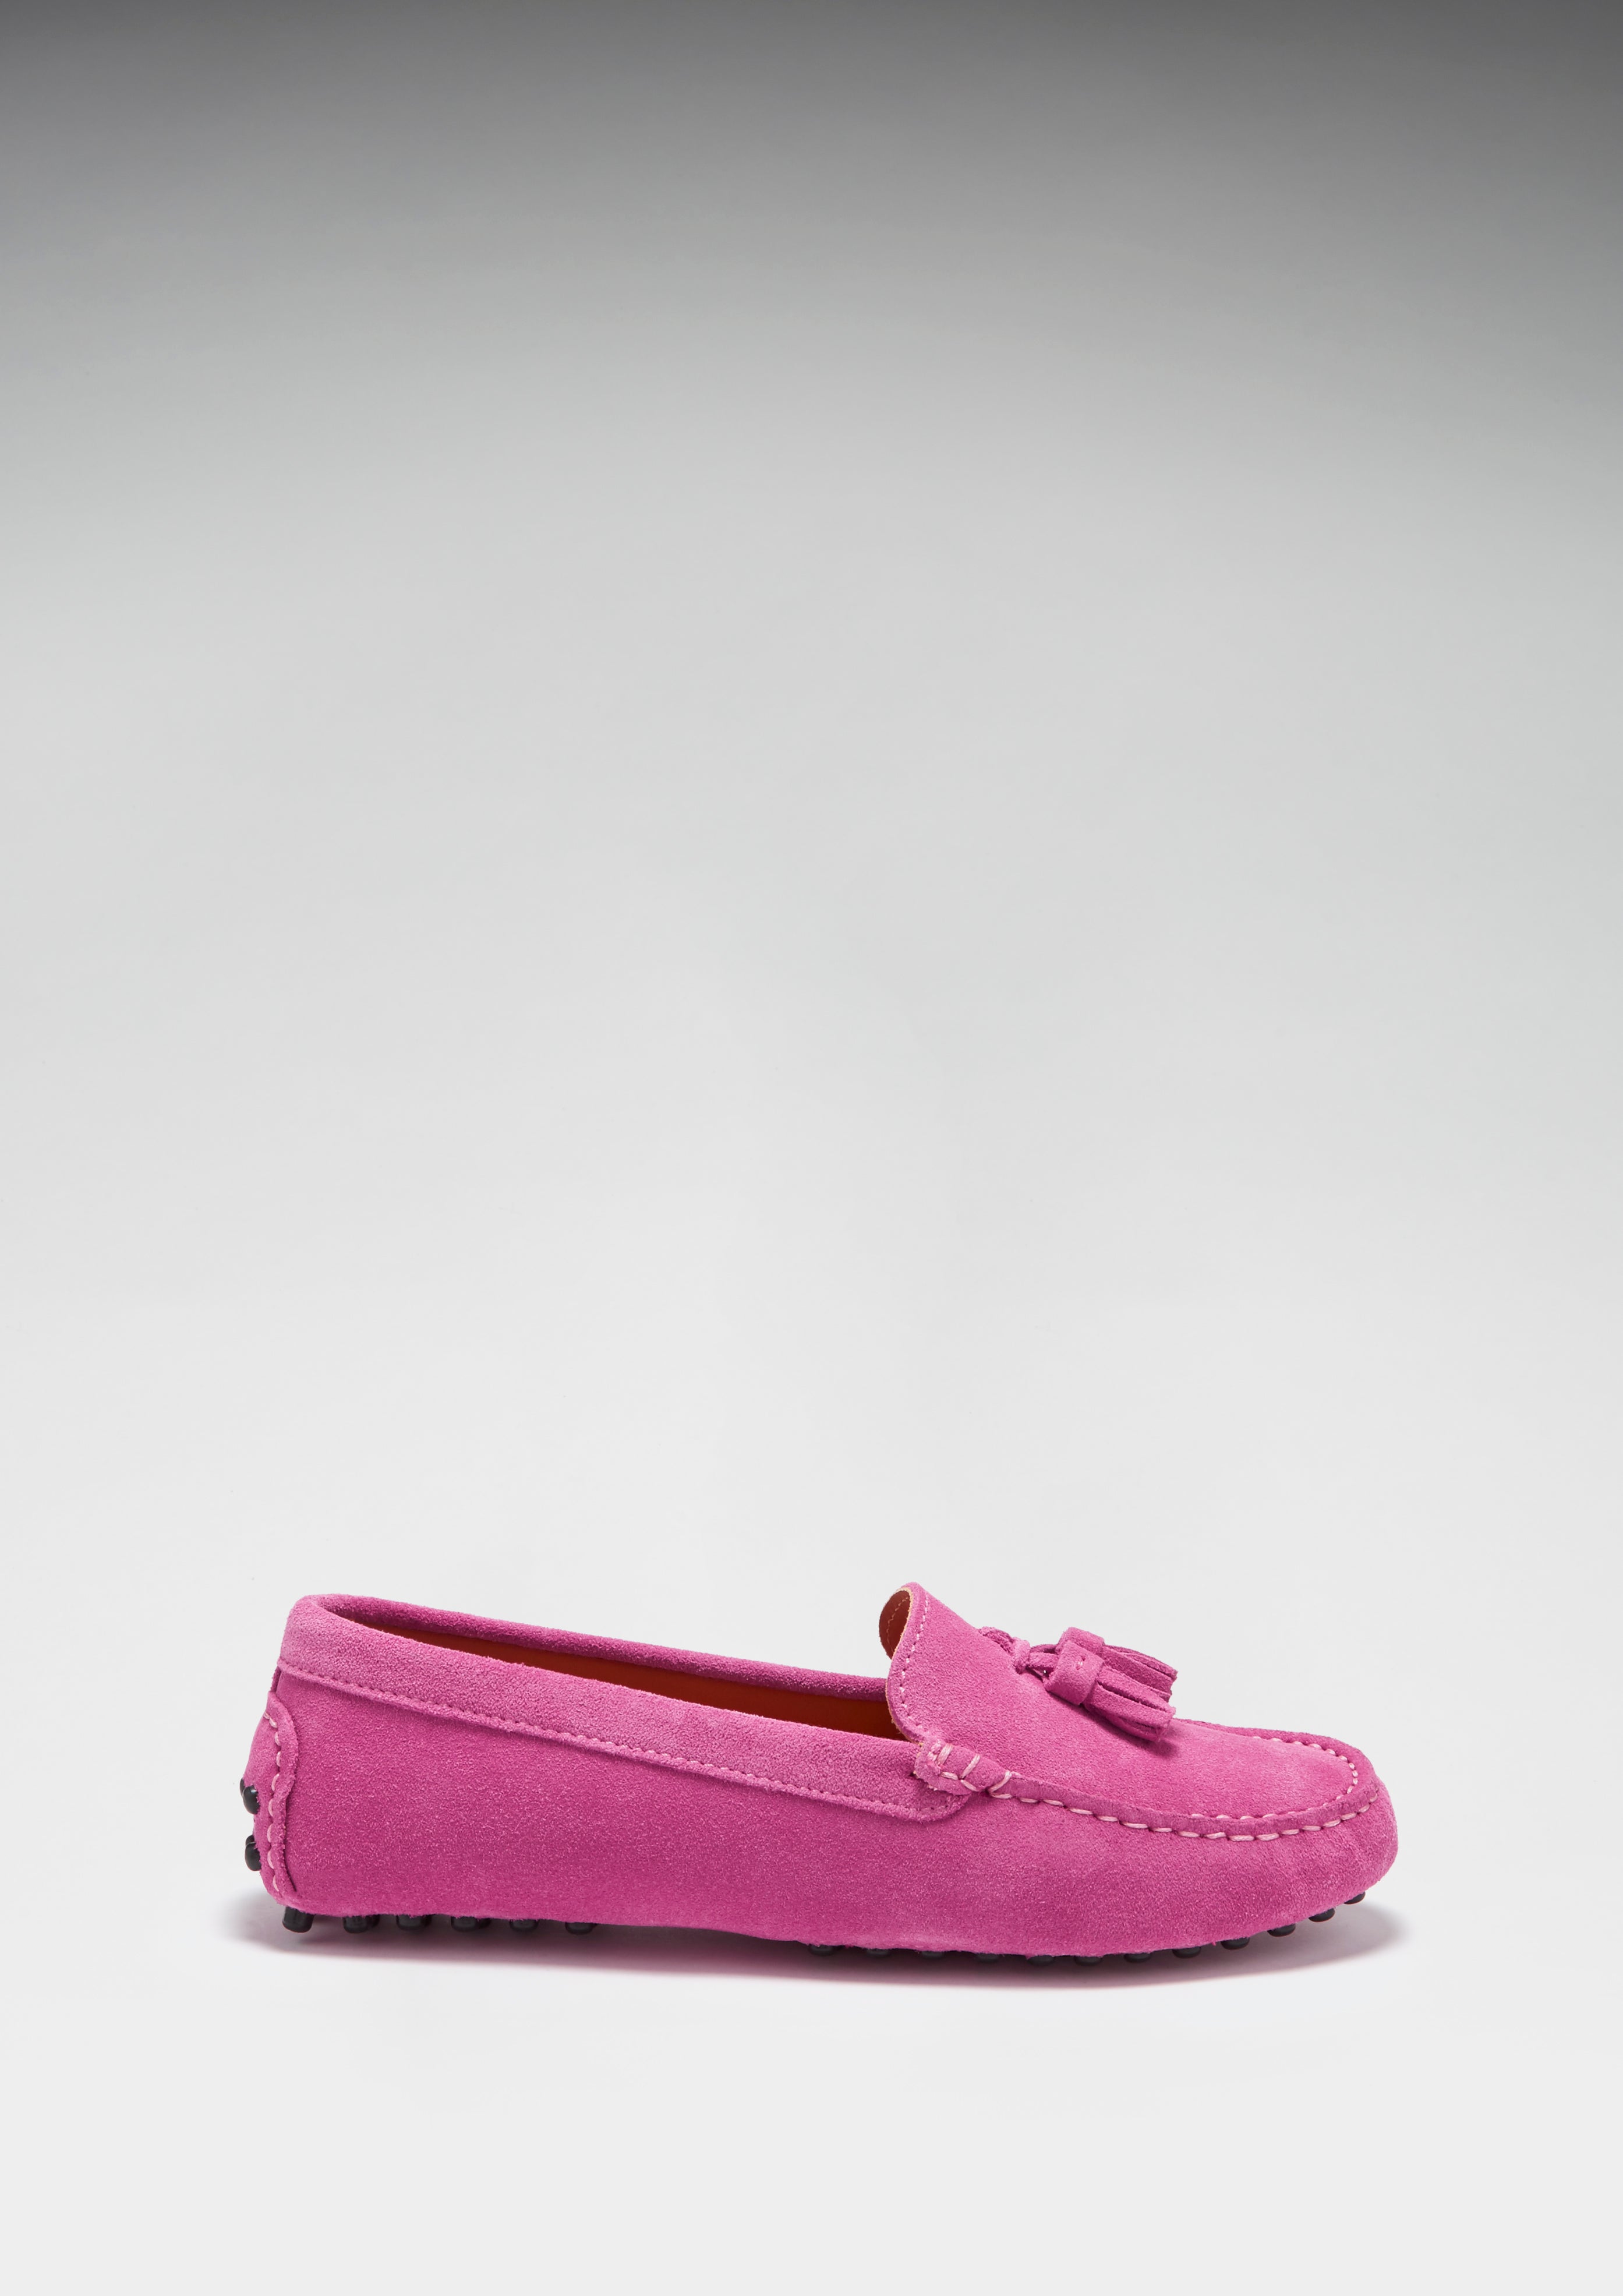 Women's Tasselled Driving Loafers, pink 